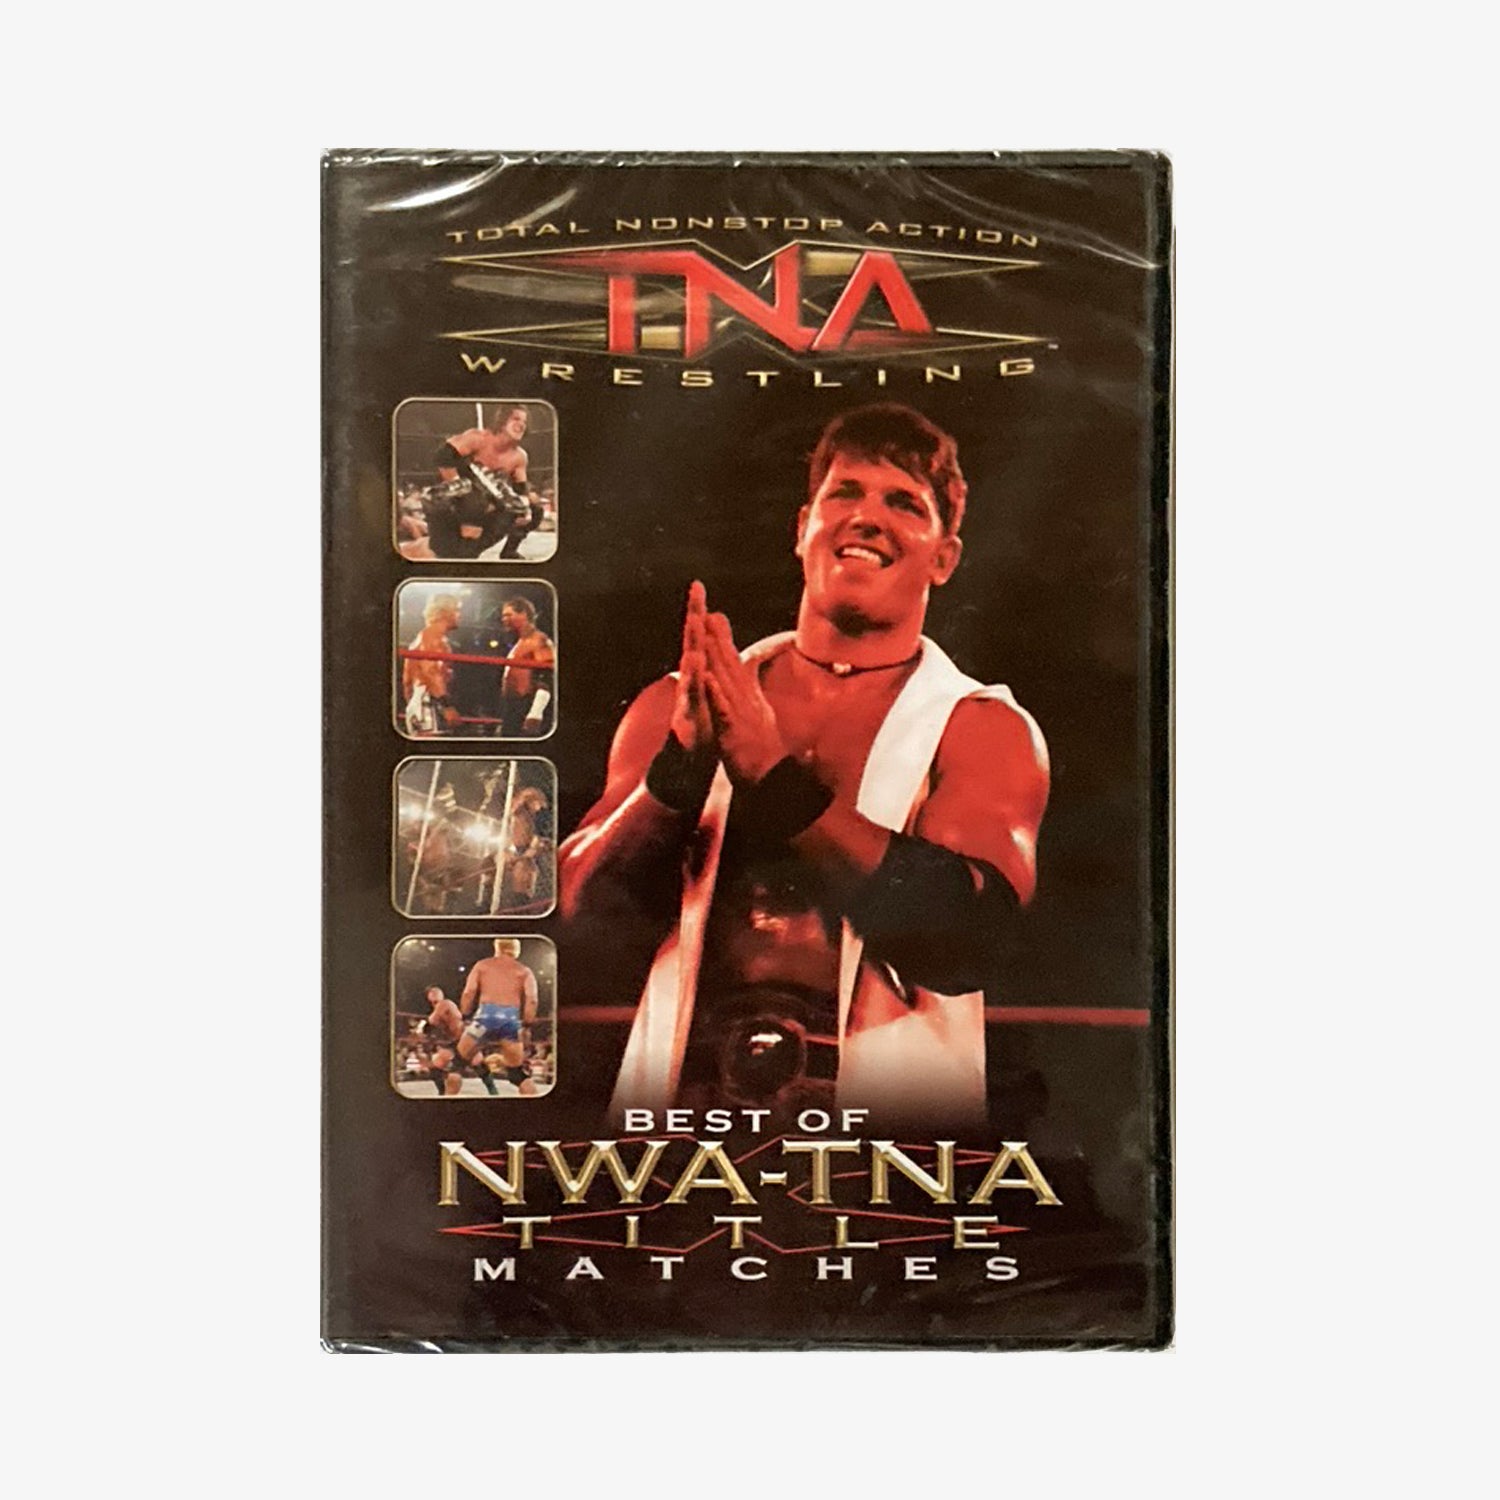 TNA Best of NWA-TNA Title Matches DVD from Fightabilia.com